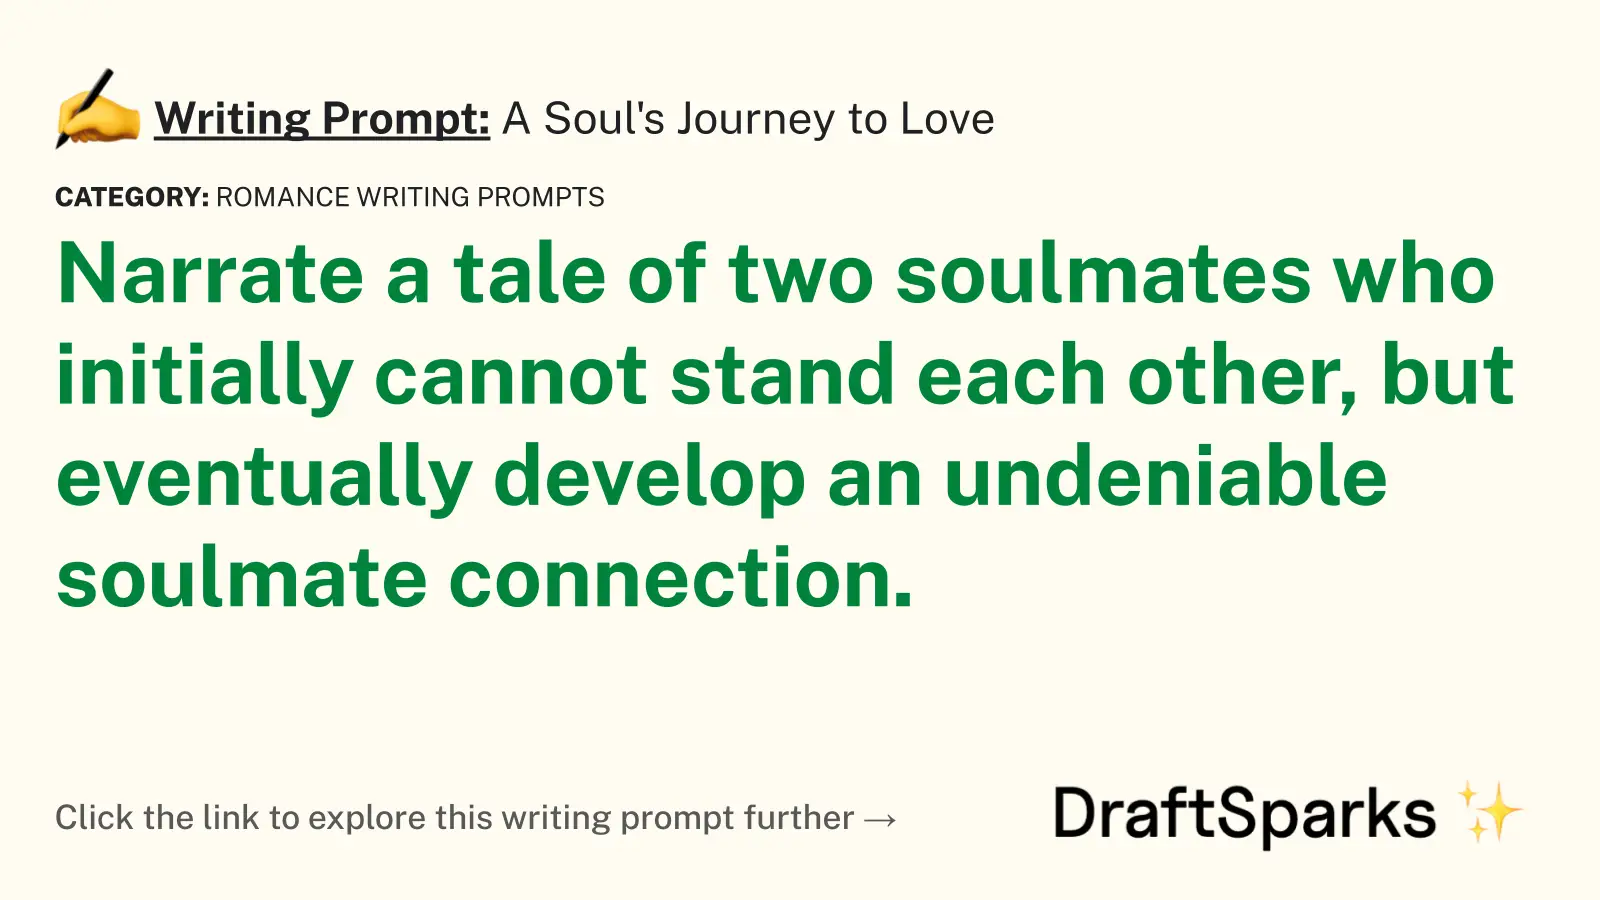 A Soul’s Journey to Love